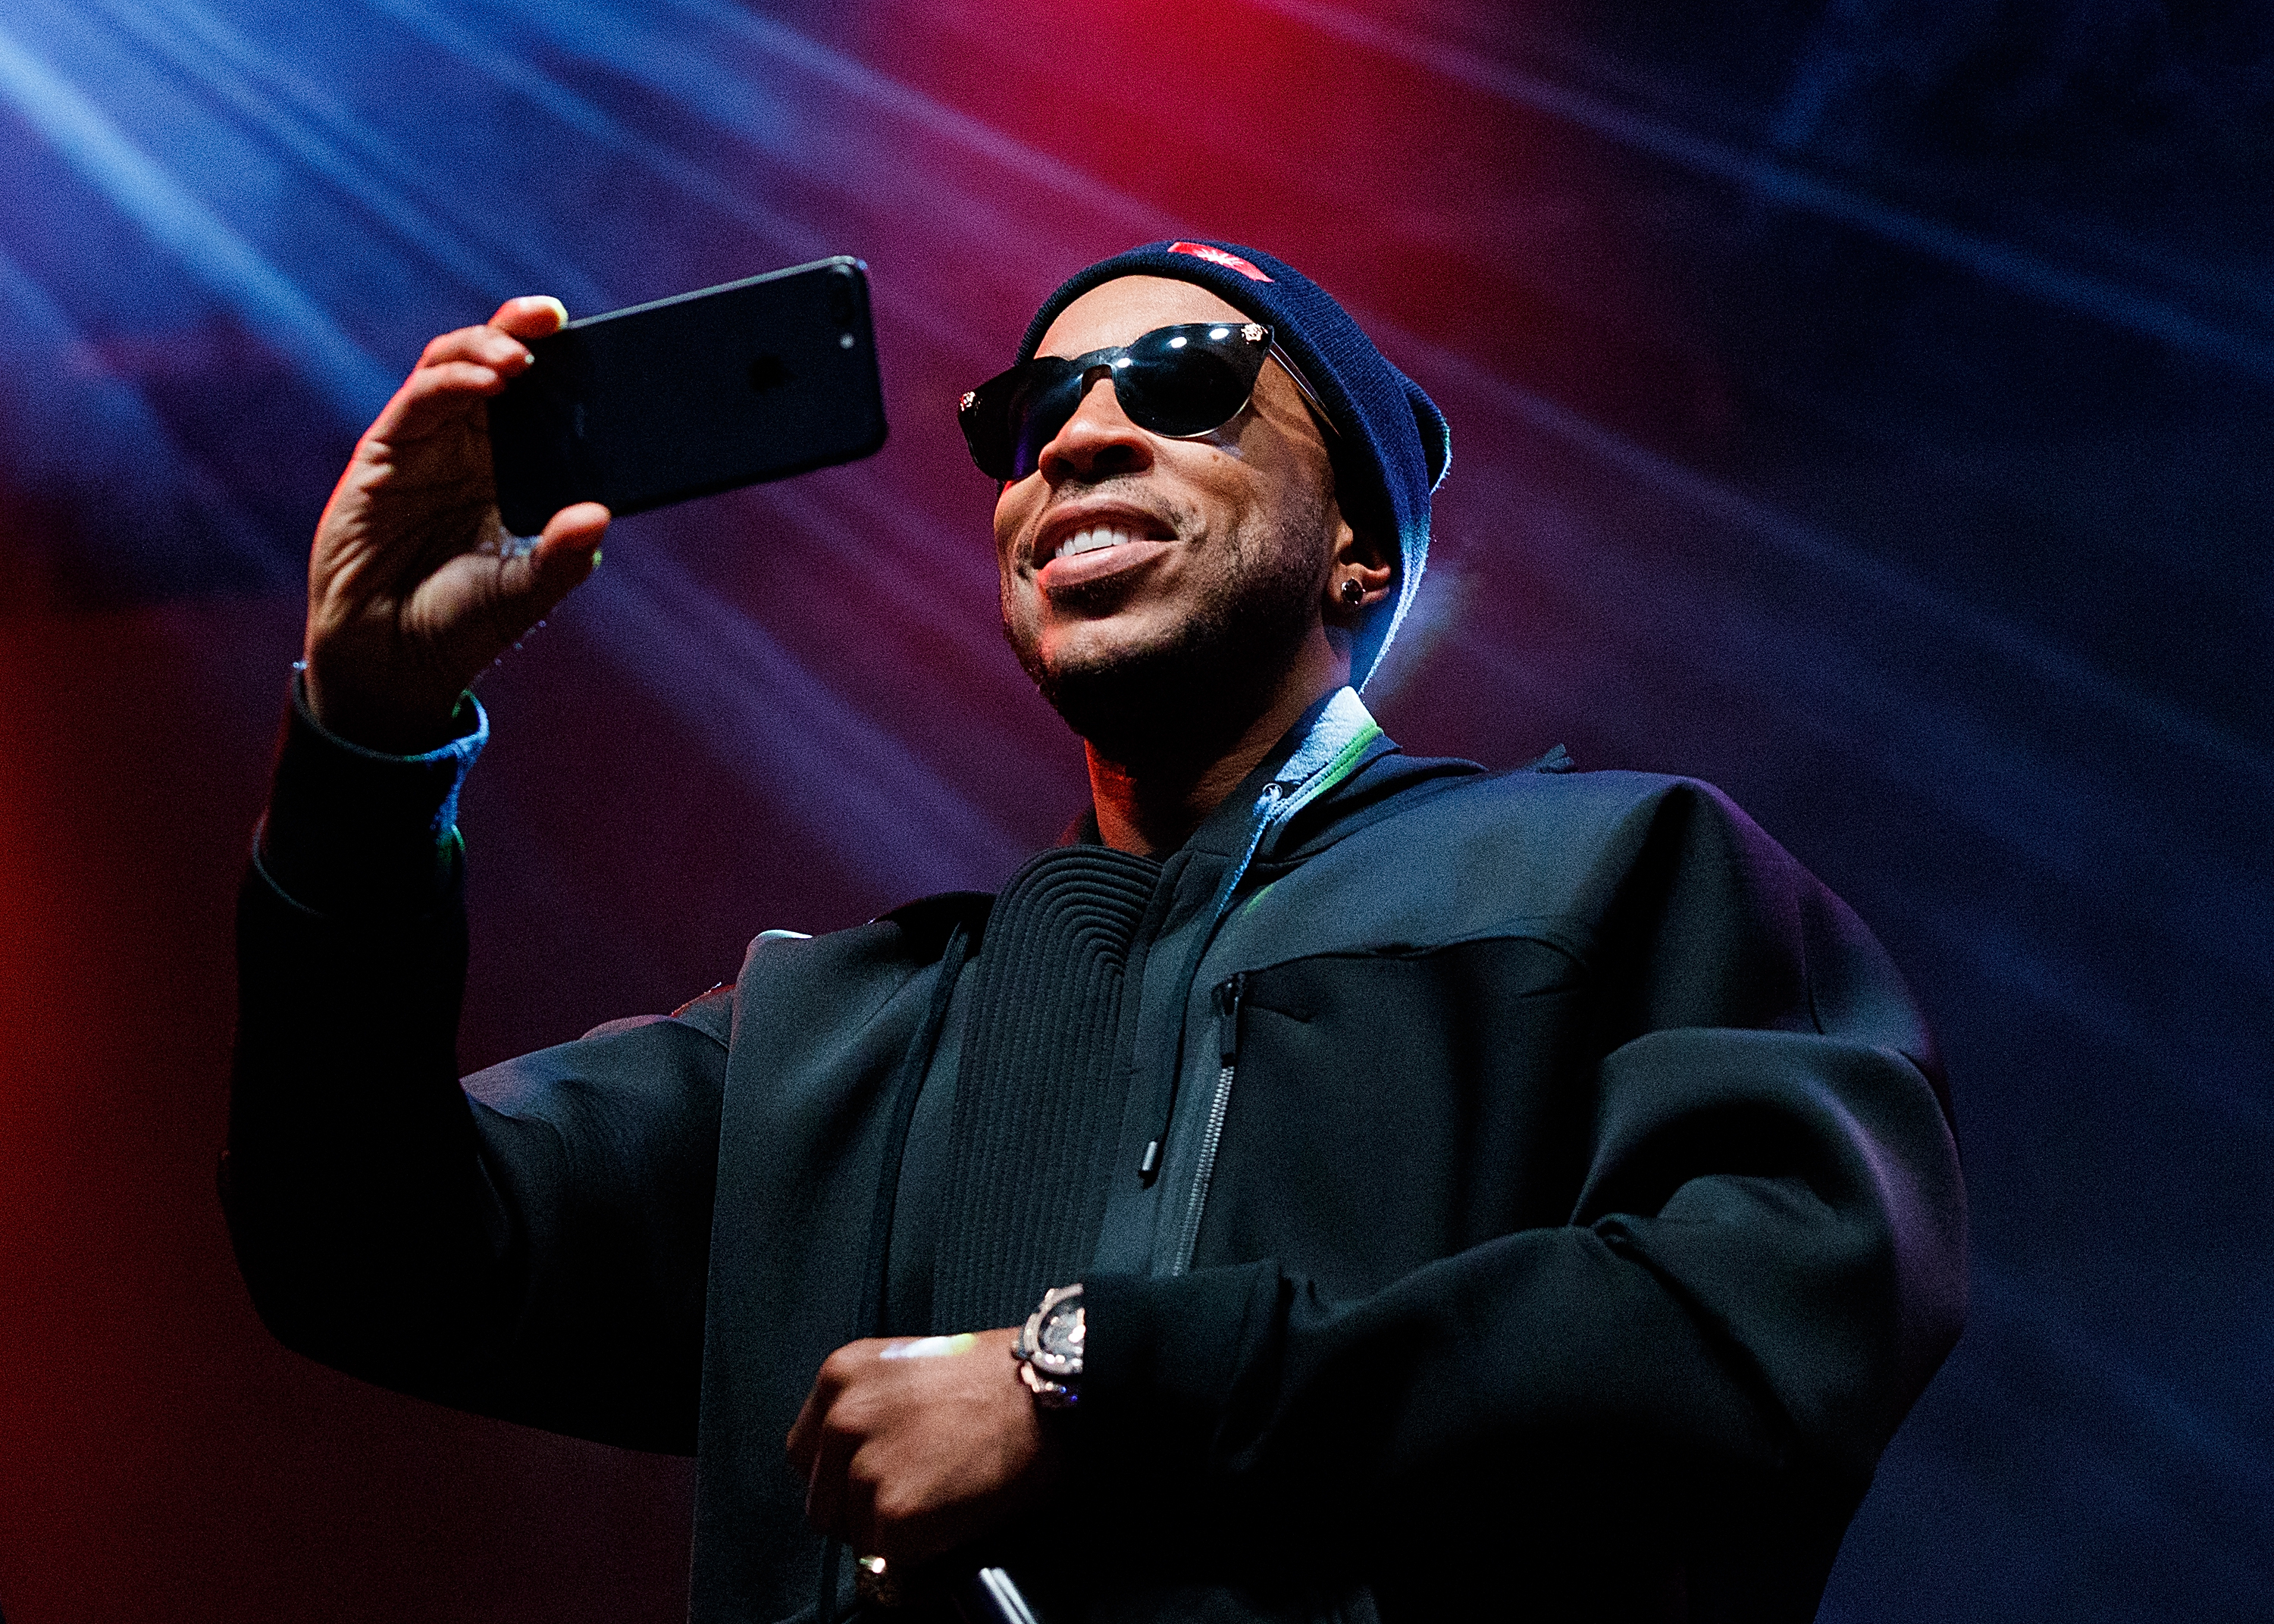 Hip-hop artist Ludacris performs on stage during Day 4 of Coors Light Snowbombing at Sun Peaks Resort on April 9, 2017 in Sun Peaks, Canada. (Andrew Chin—Getty Images)